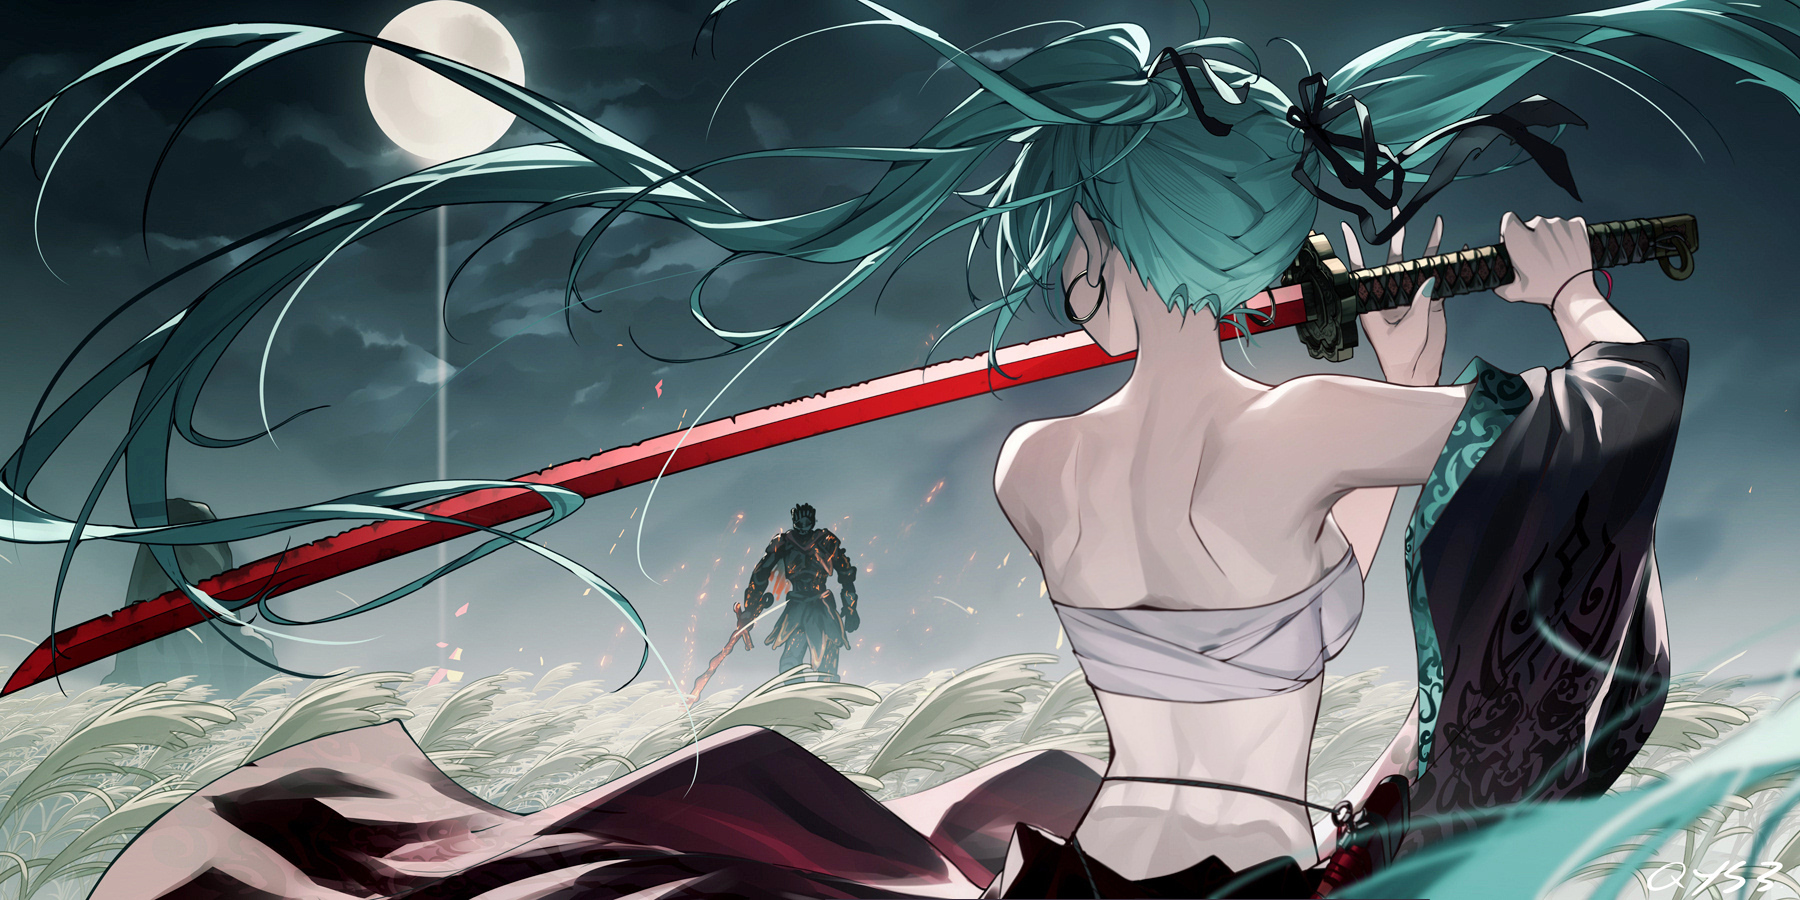 Anime 1800x900 anime anime girls Hatsune Miku Vocaloid sarashi bandages full moon katana weapon Moon twintails crossover Dark Souls Bai Yemeng Soul of Cinder long hair field fighting stance signature moonlight hair blowing in the wind wind